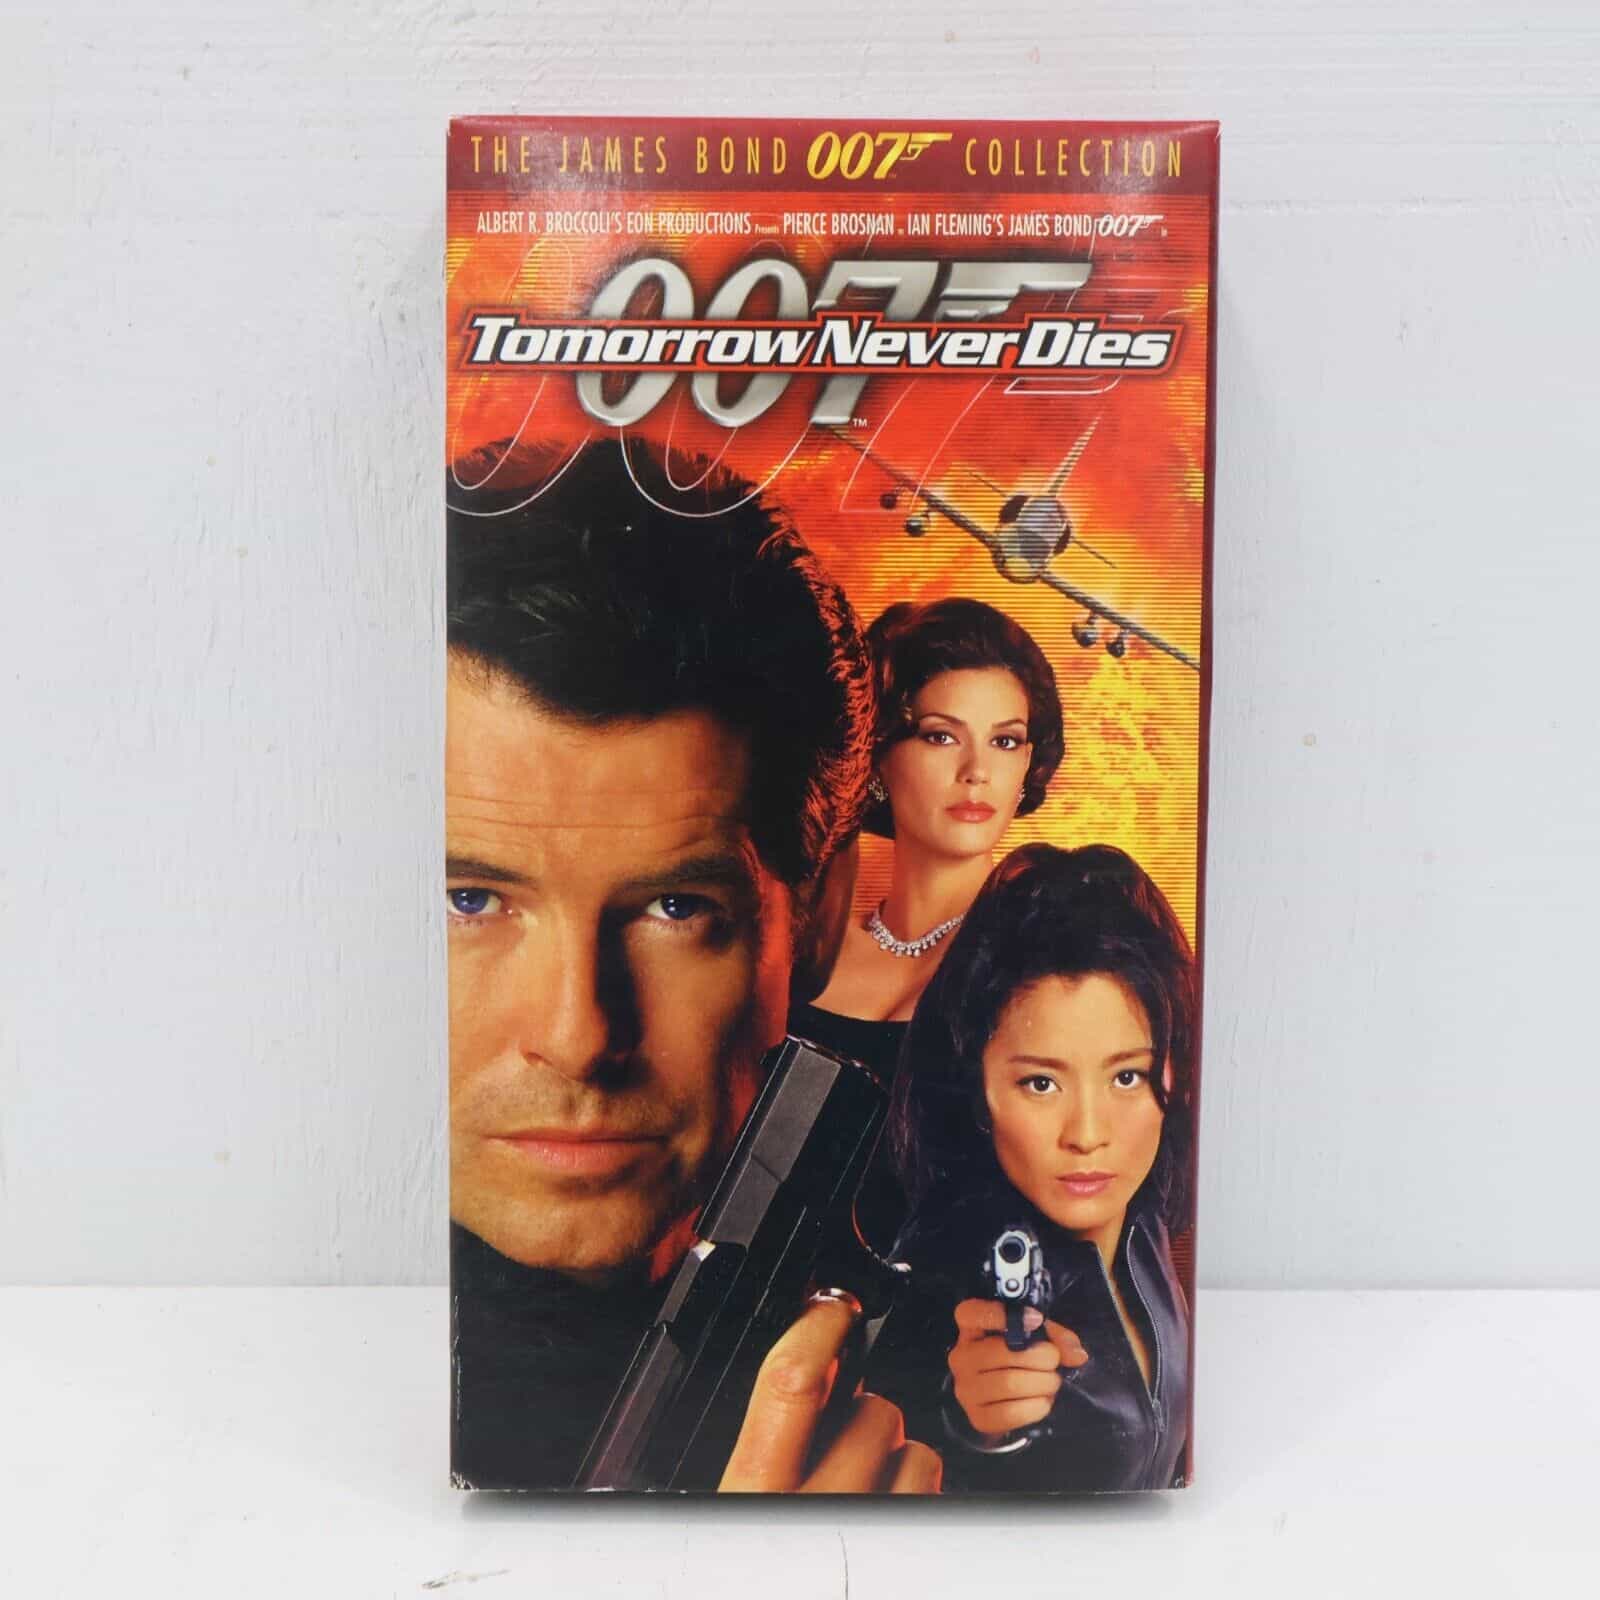 Tomorrow Never Dies (VHS, 1999, James Bond 007 Collection)